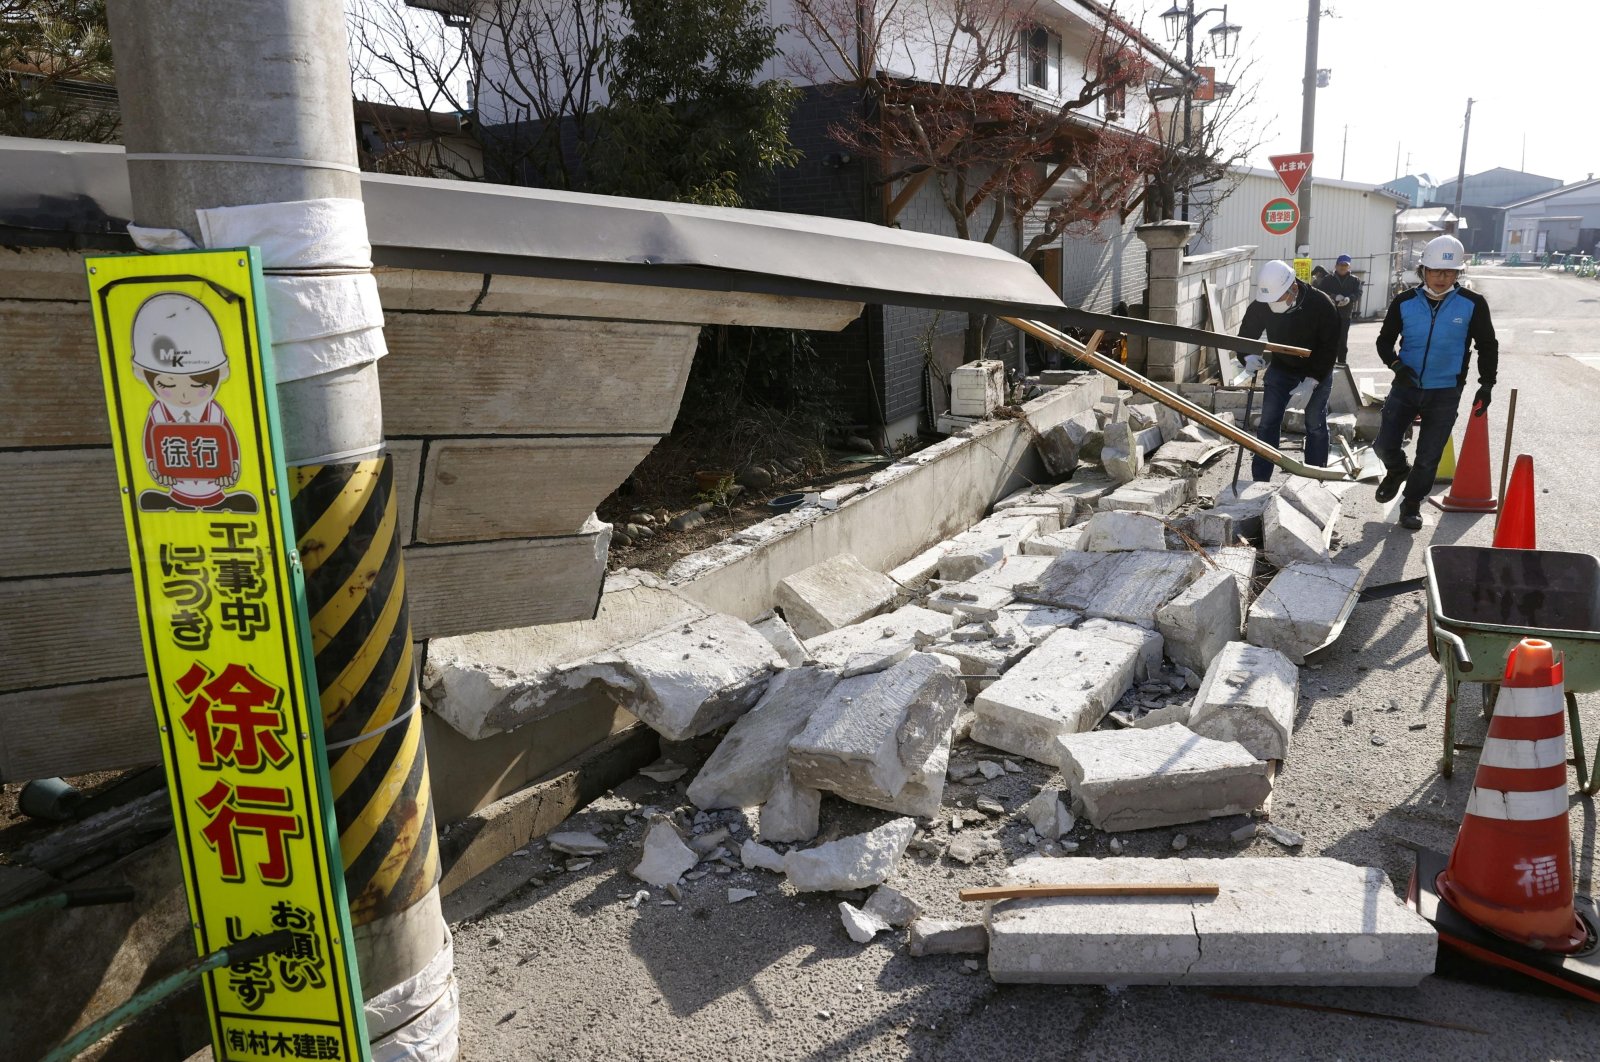 Debris from a wall that collapsed during a strong earthquake covers the sidewalk in Kunimi, Fukushima Prefecture, Japan, Feb. 14, 2021. (Kyodo via Reuters)